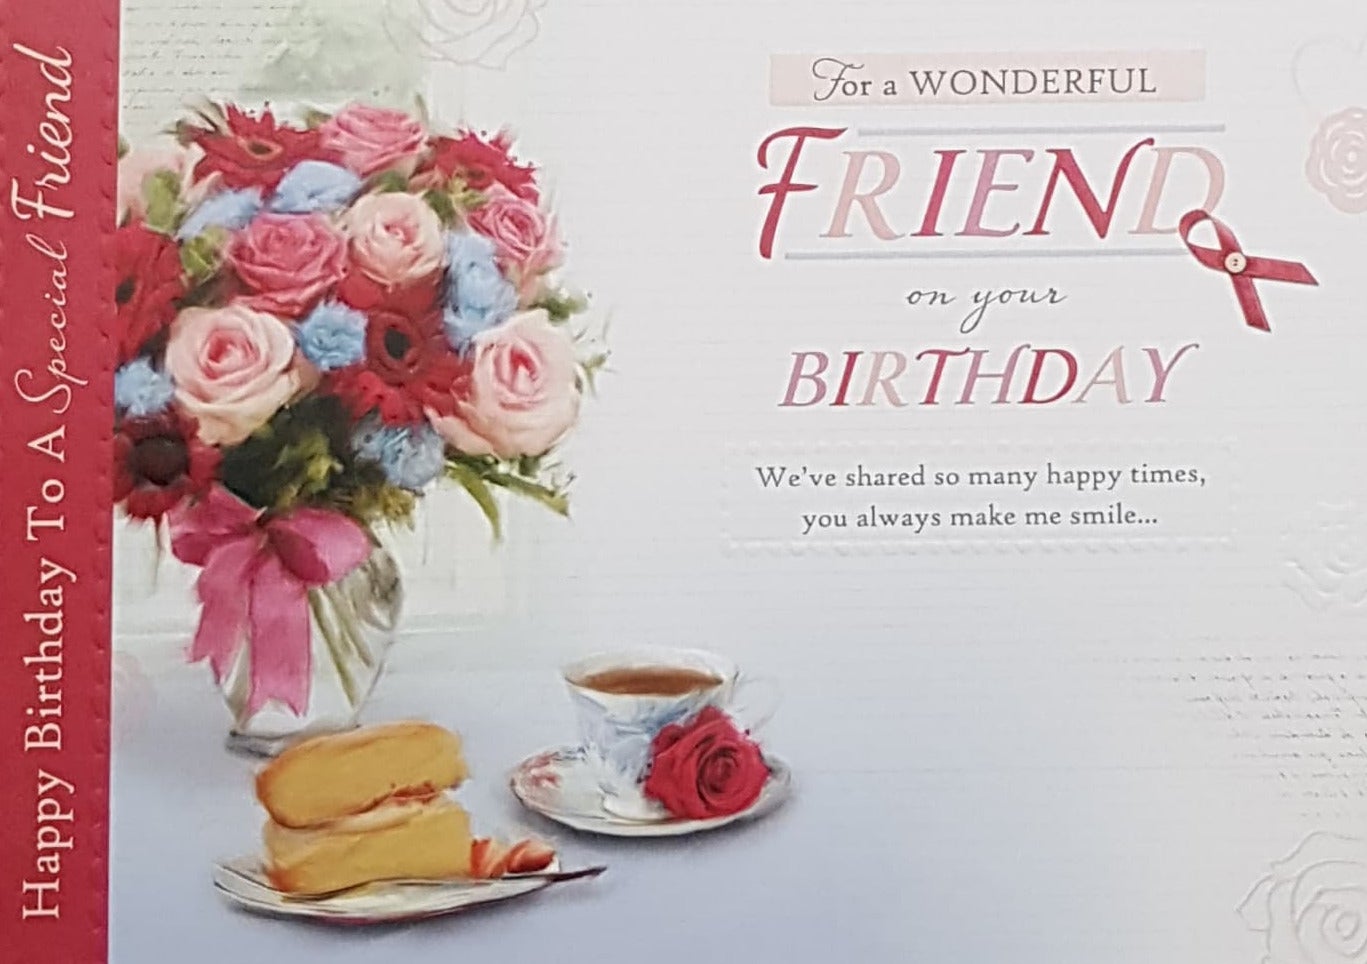 Birthday Card - Wonderful Friend / A Cake Slice, A Rose Beside Teacup, Pink & Red Roses